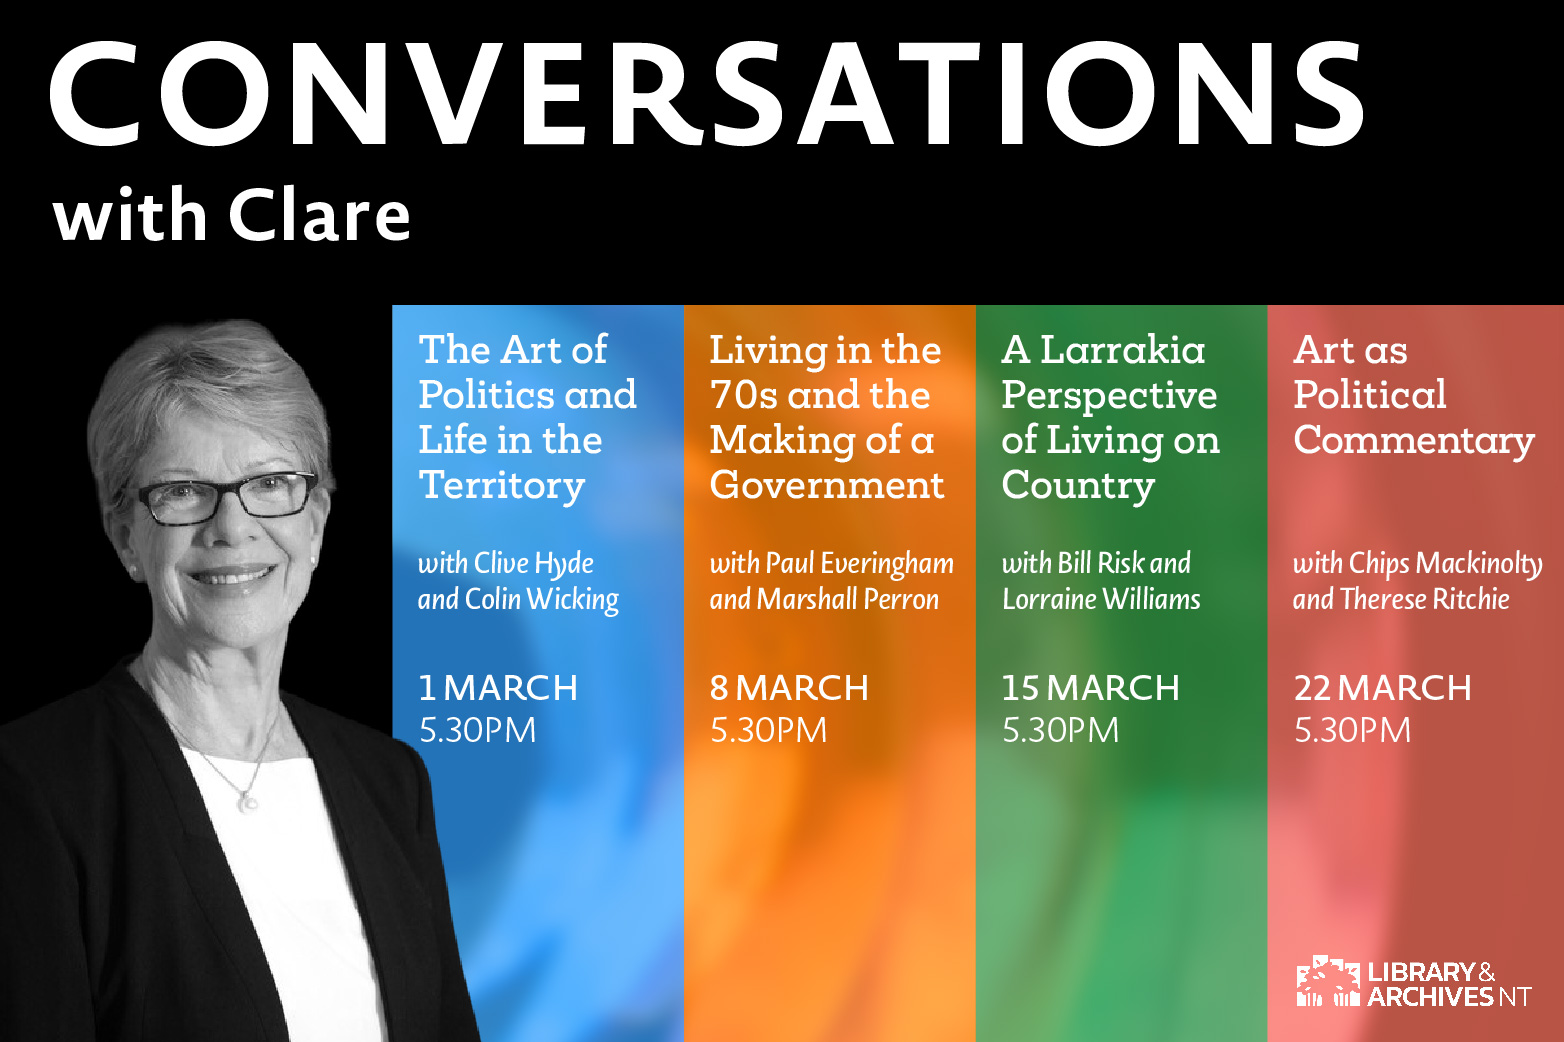 'Conversations with Clare' Events on in March at the NT Library